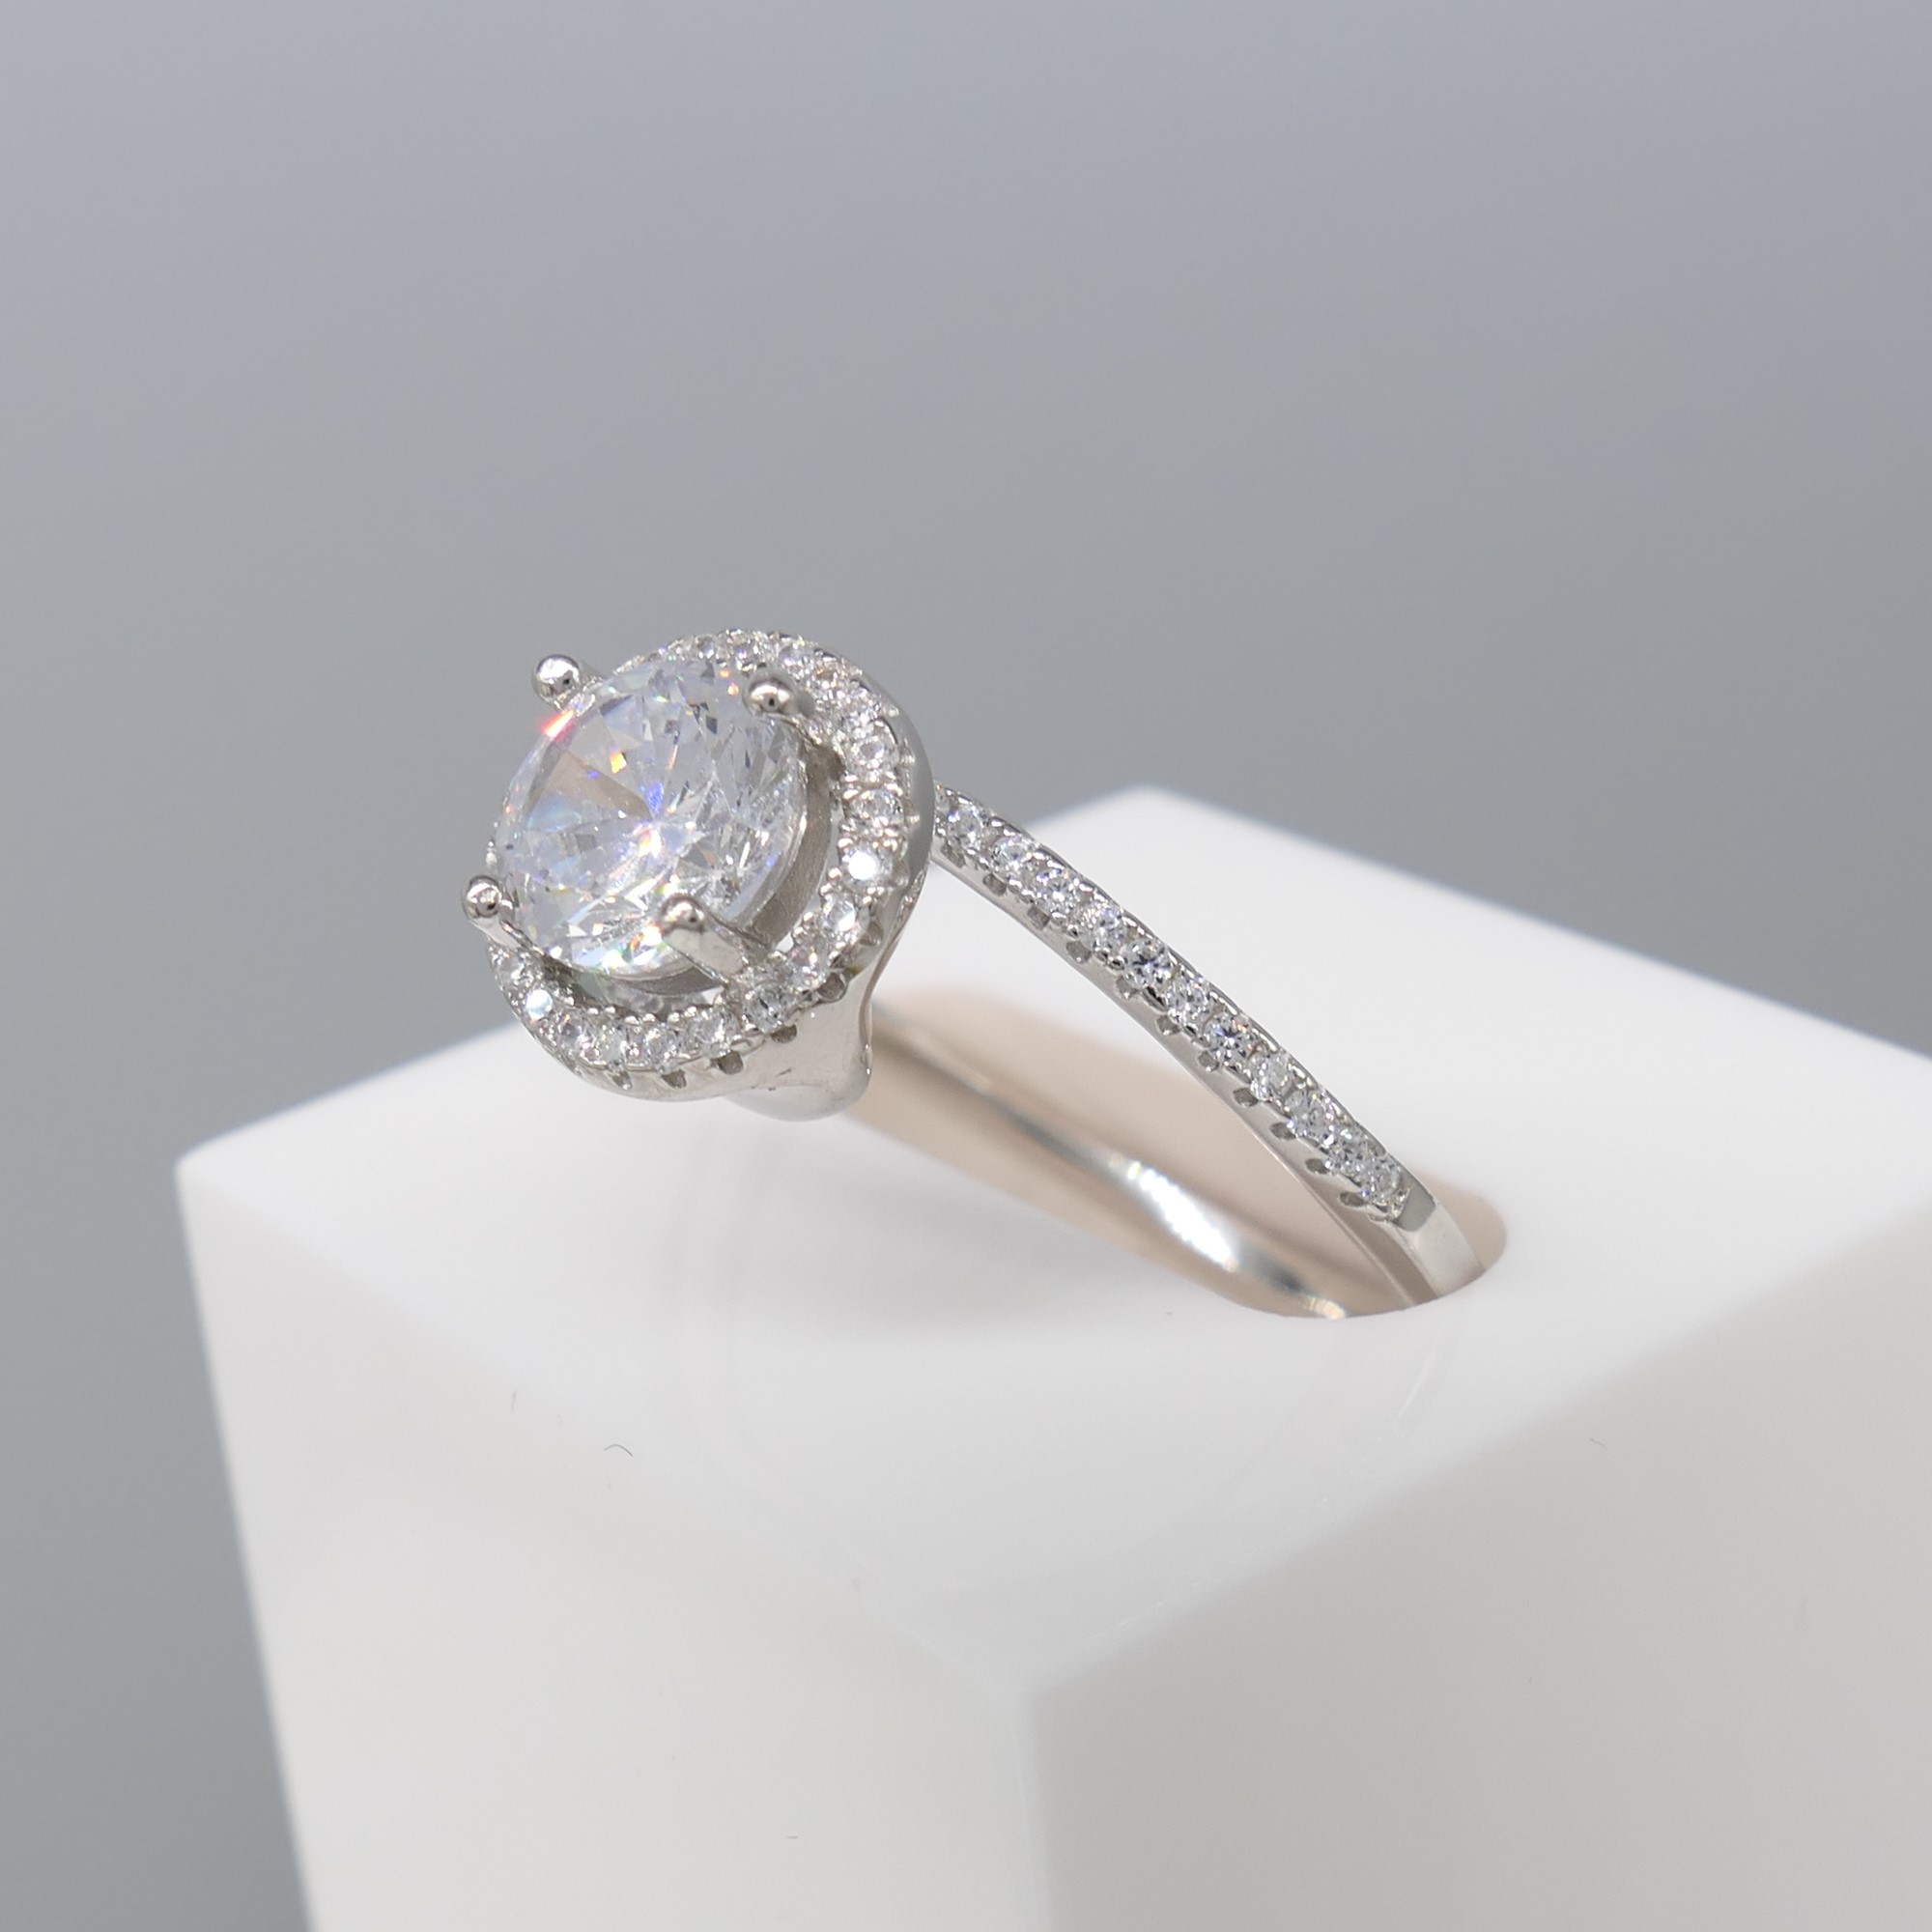 Silver cubic zirconia halo and twist dress ring - Image 4 of 6